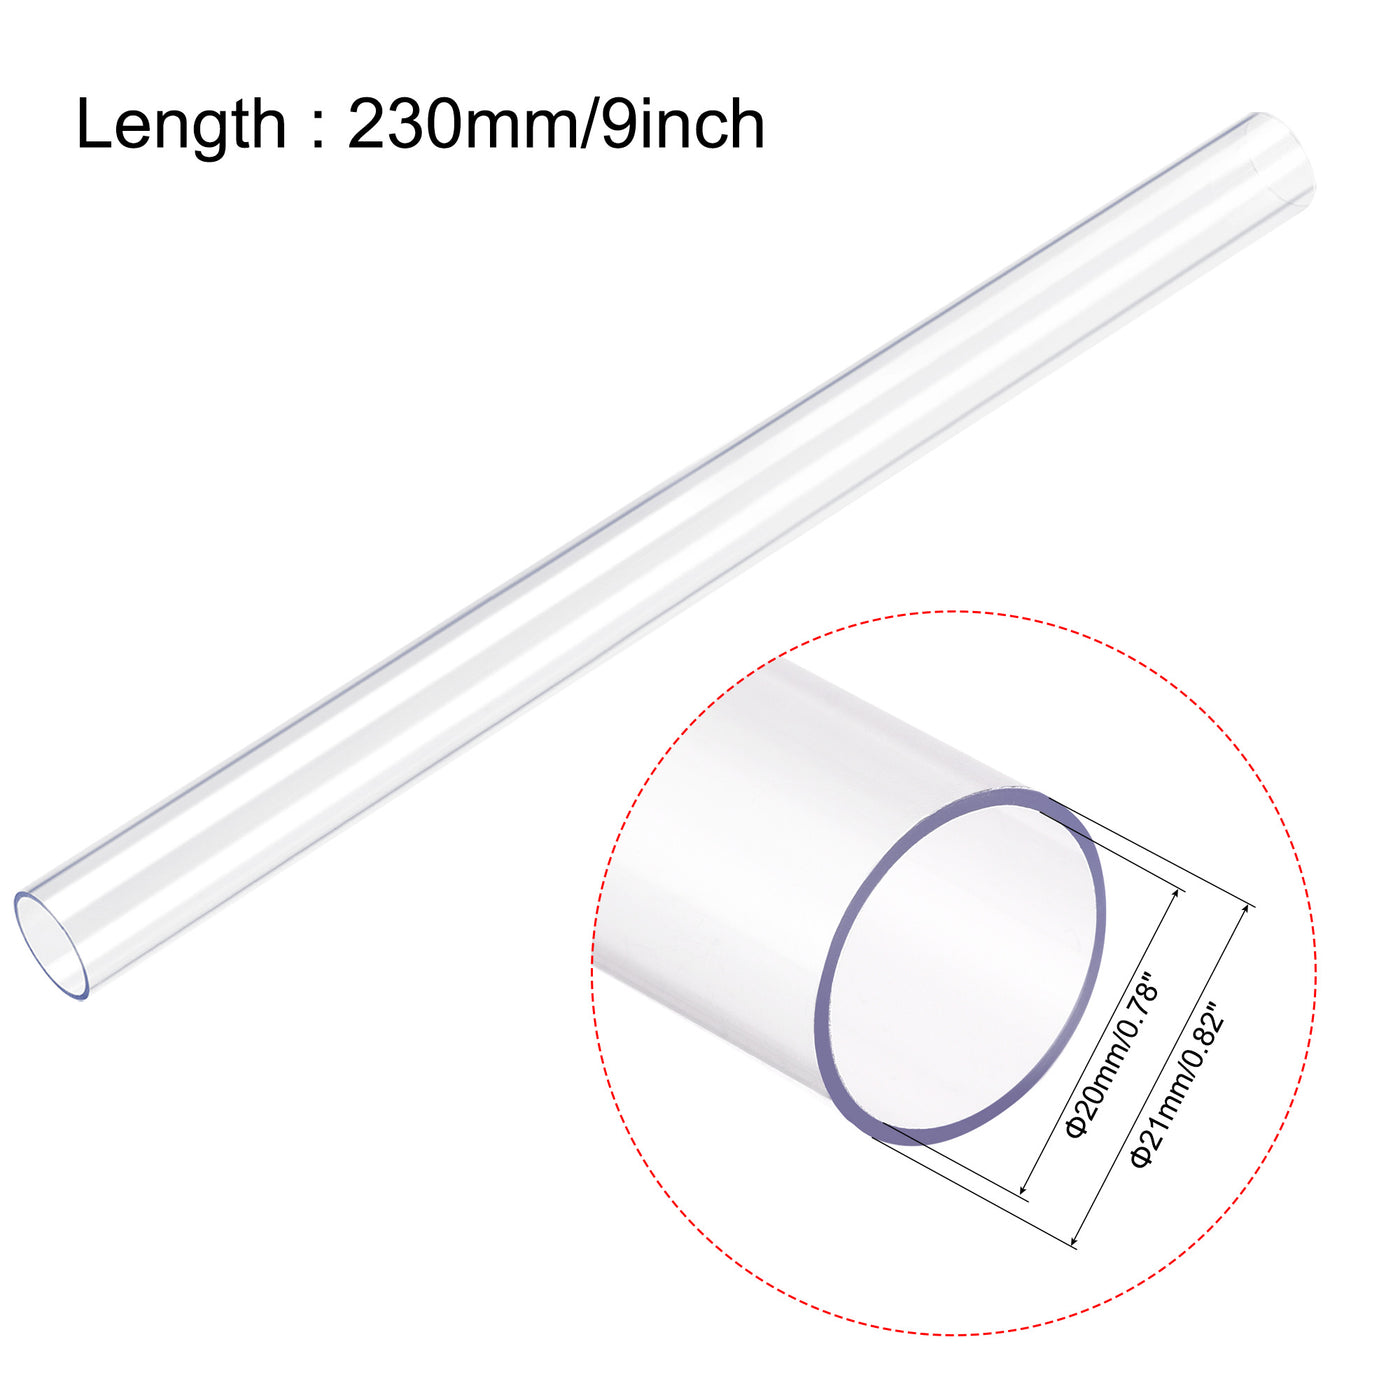 uxcell Uxcell Polycarbonate Rigid Round Clear Tubing 20mm(0.78 Inch)IDx21mm(0.82 Inch)ODx230mm(9 Inch) Length Plastic Storage Transparent Tube with Lids